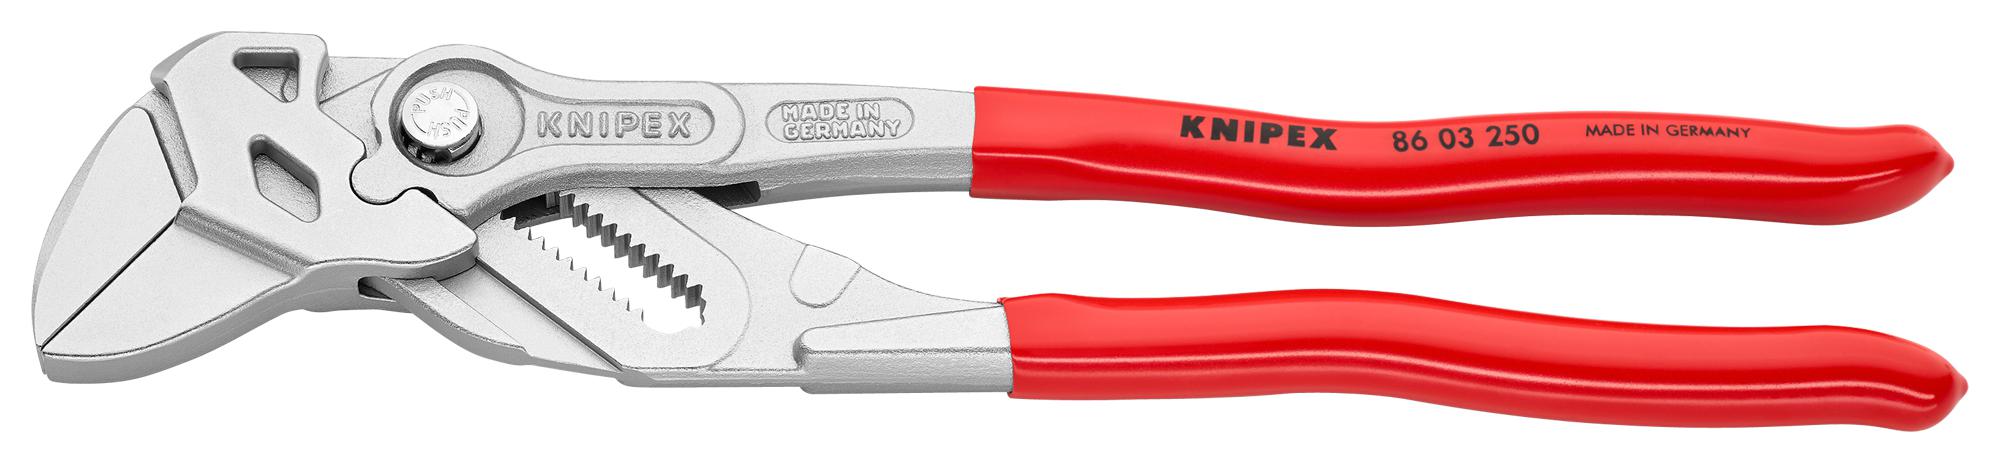 33814/8603250 WRENCH, ADJUSTABLE KNIPEX